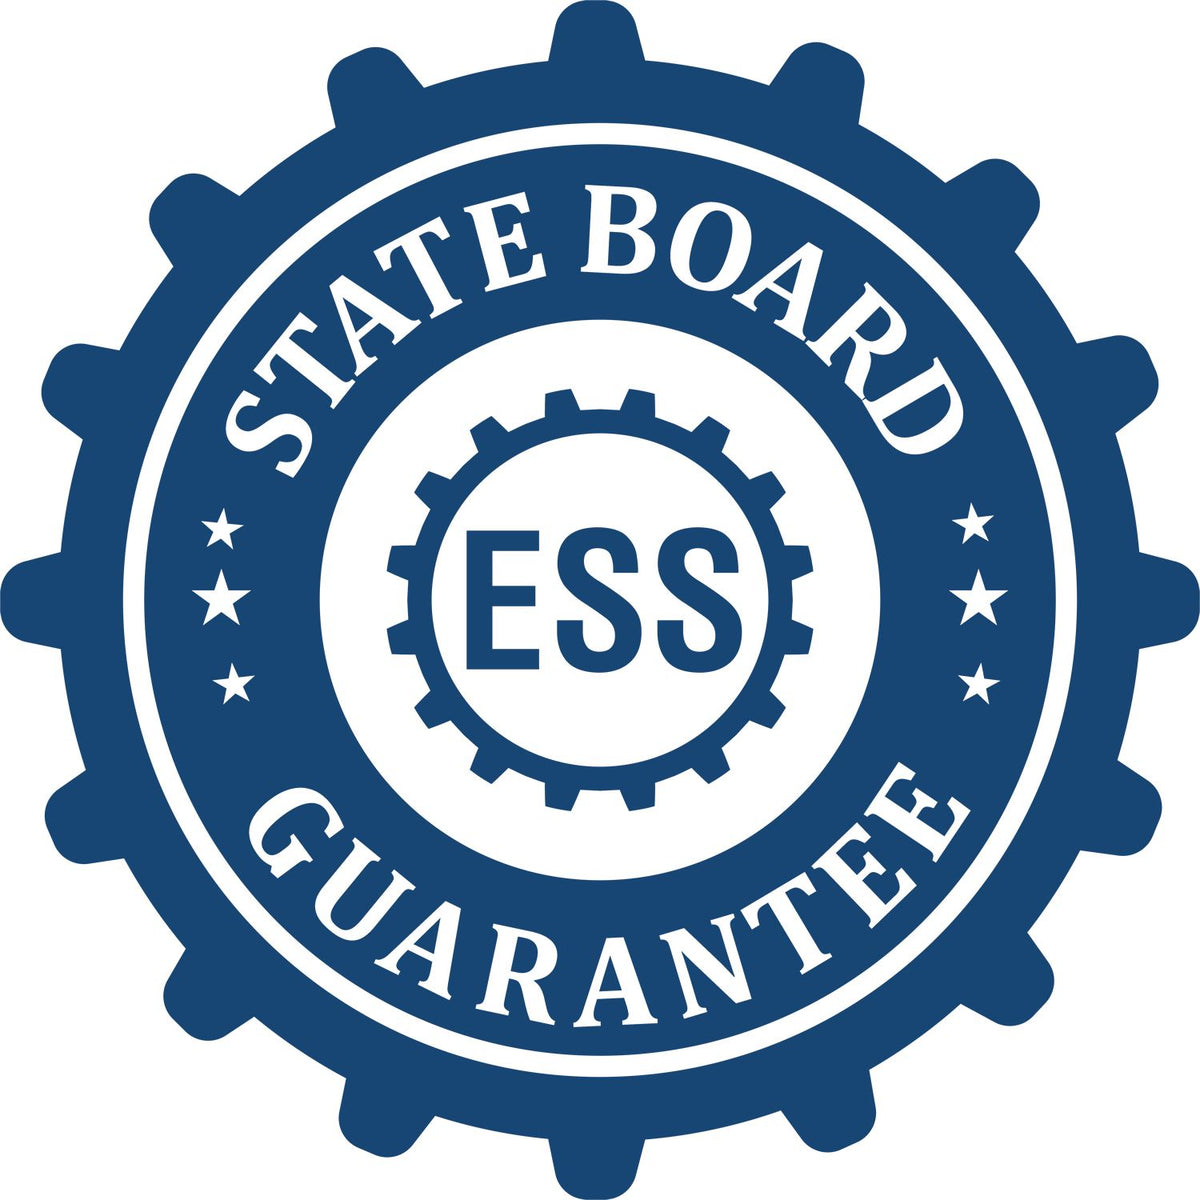 An emblem in a gear shape illustrating a state board guarantee for the Gift Mississippi Architect Seal